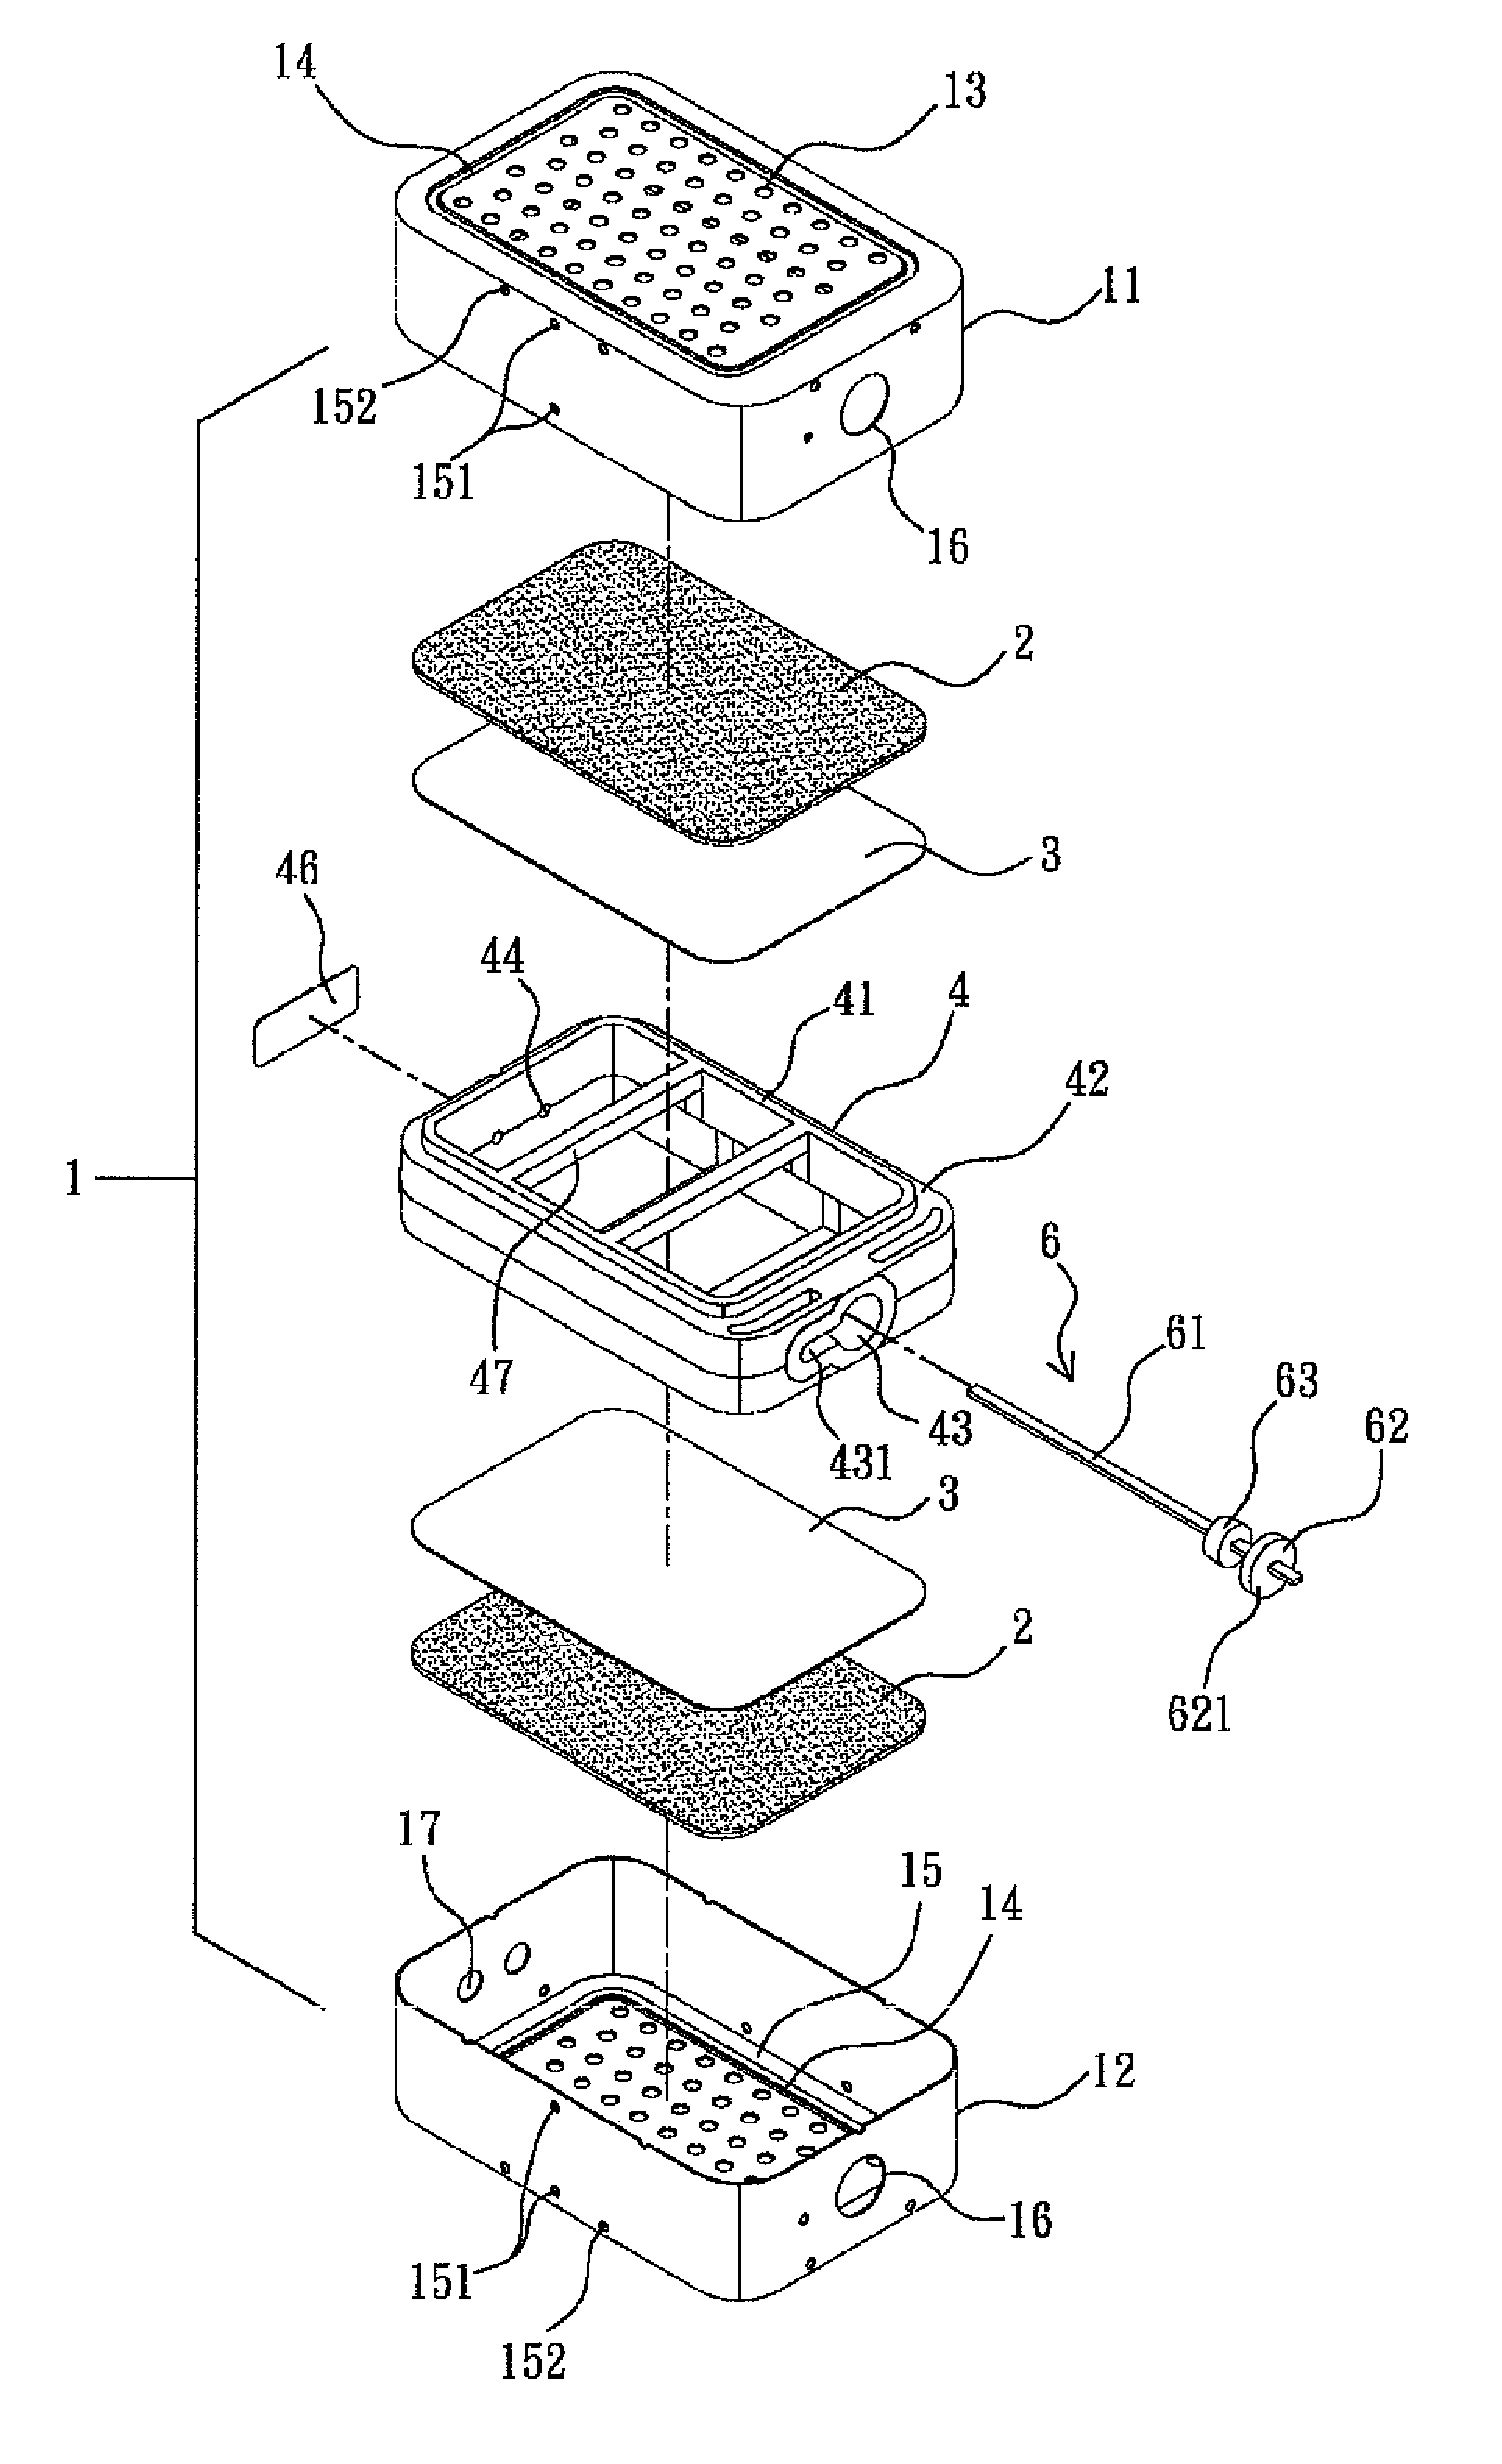 Packaging structure of low-pressure molded fuel cell